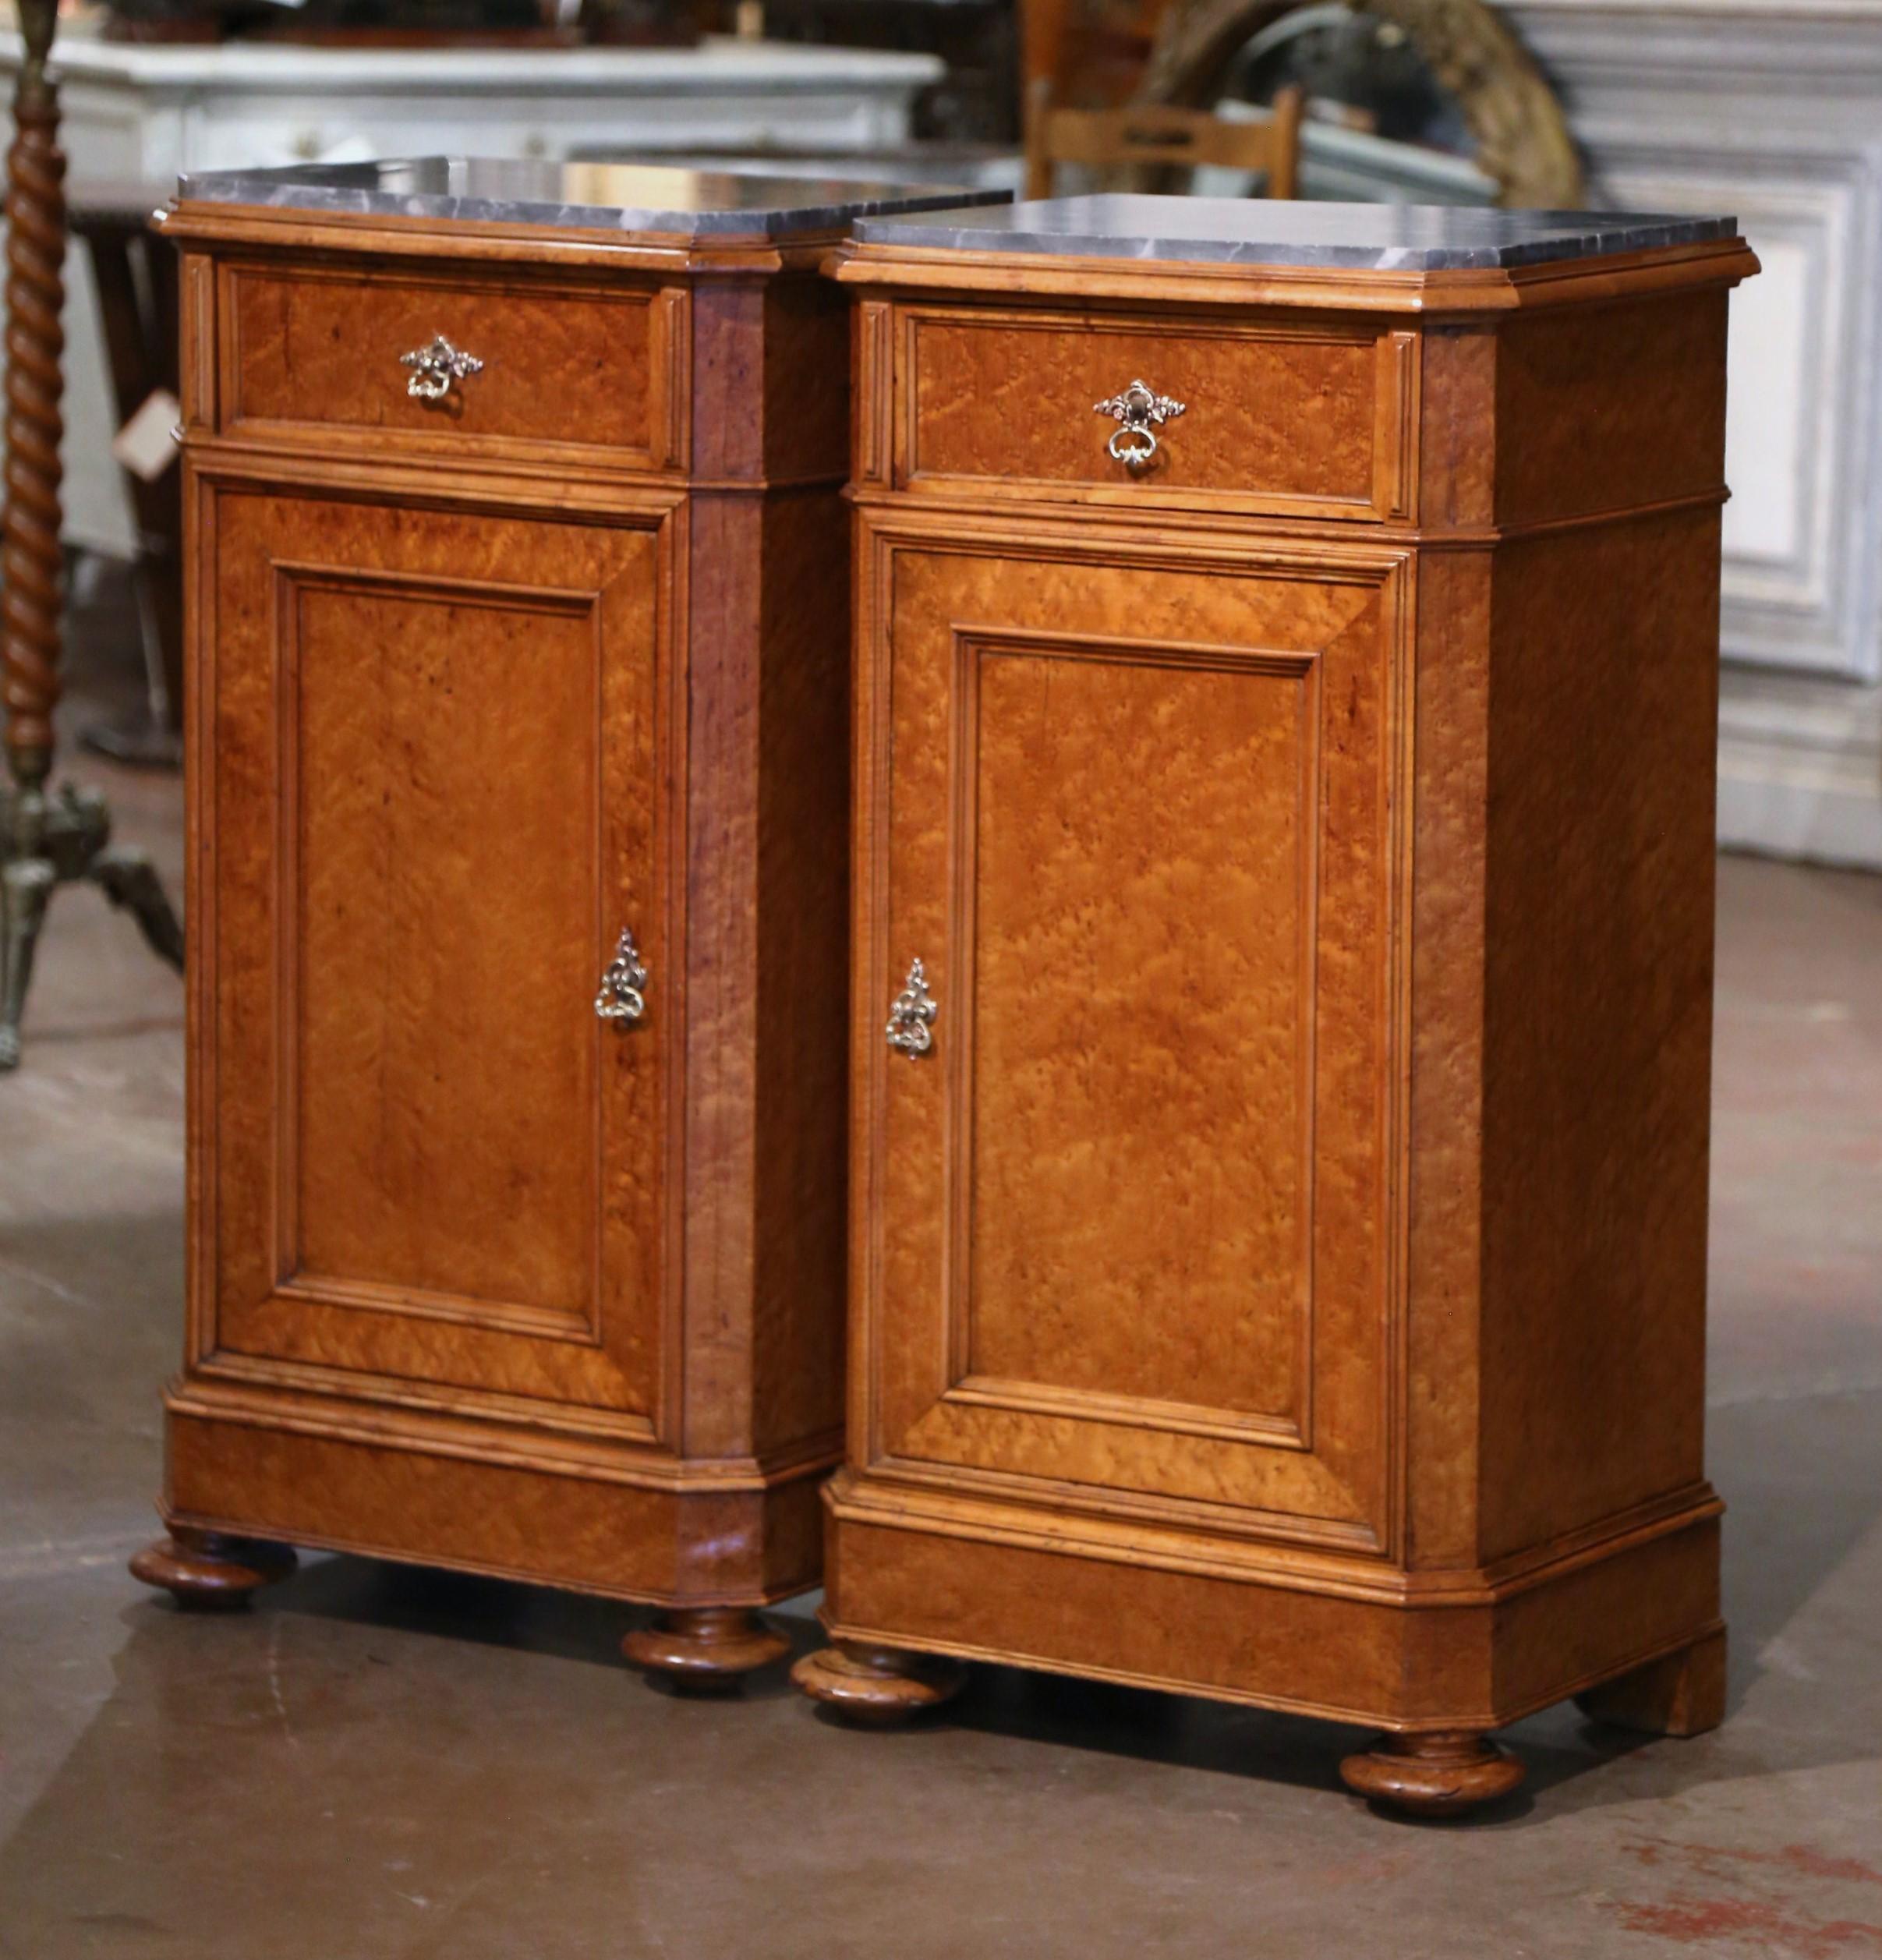 Add surface space in your bedroom with this elegant pair of antique nightstands. Crafted in Genoa, Italy circa 1870, each cabinet built of Birdseye maple, stands on bun feet over a straight plinth base; each traditional piece with clean lines